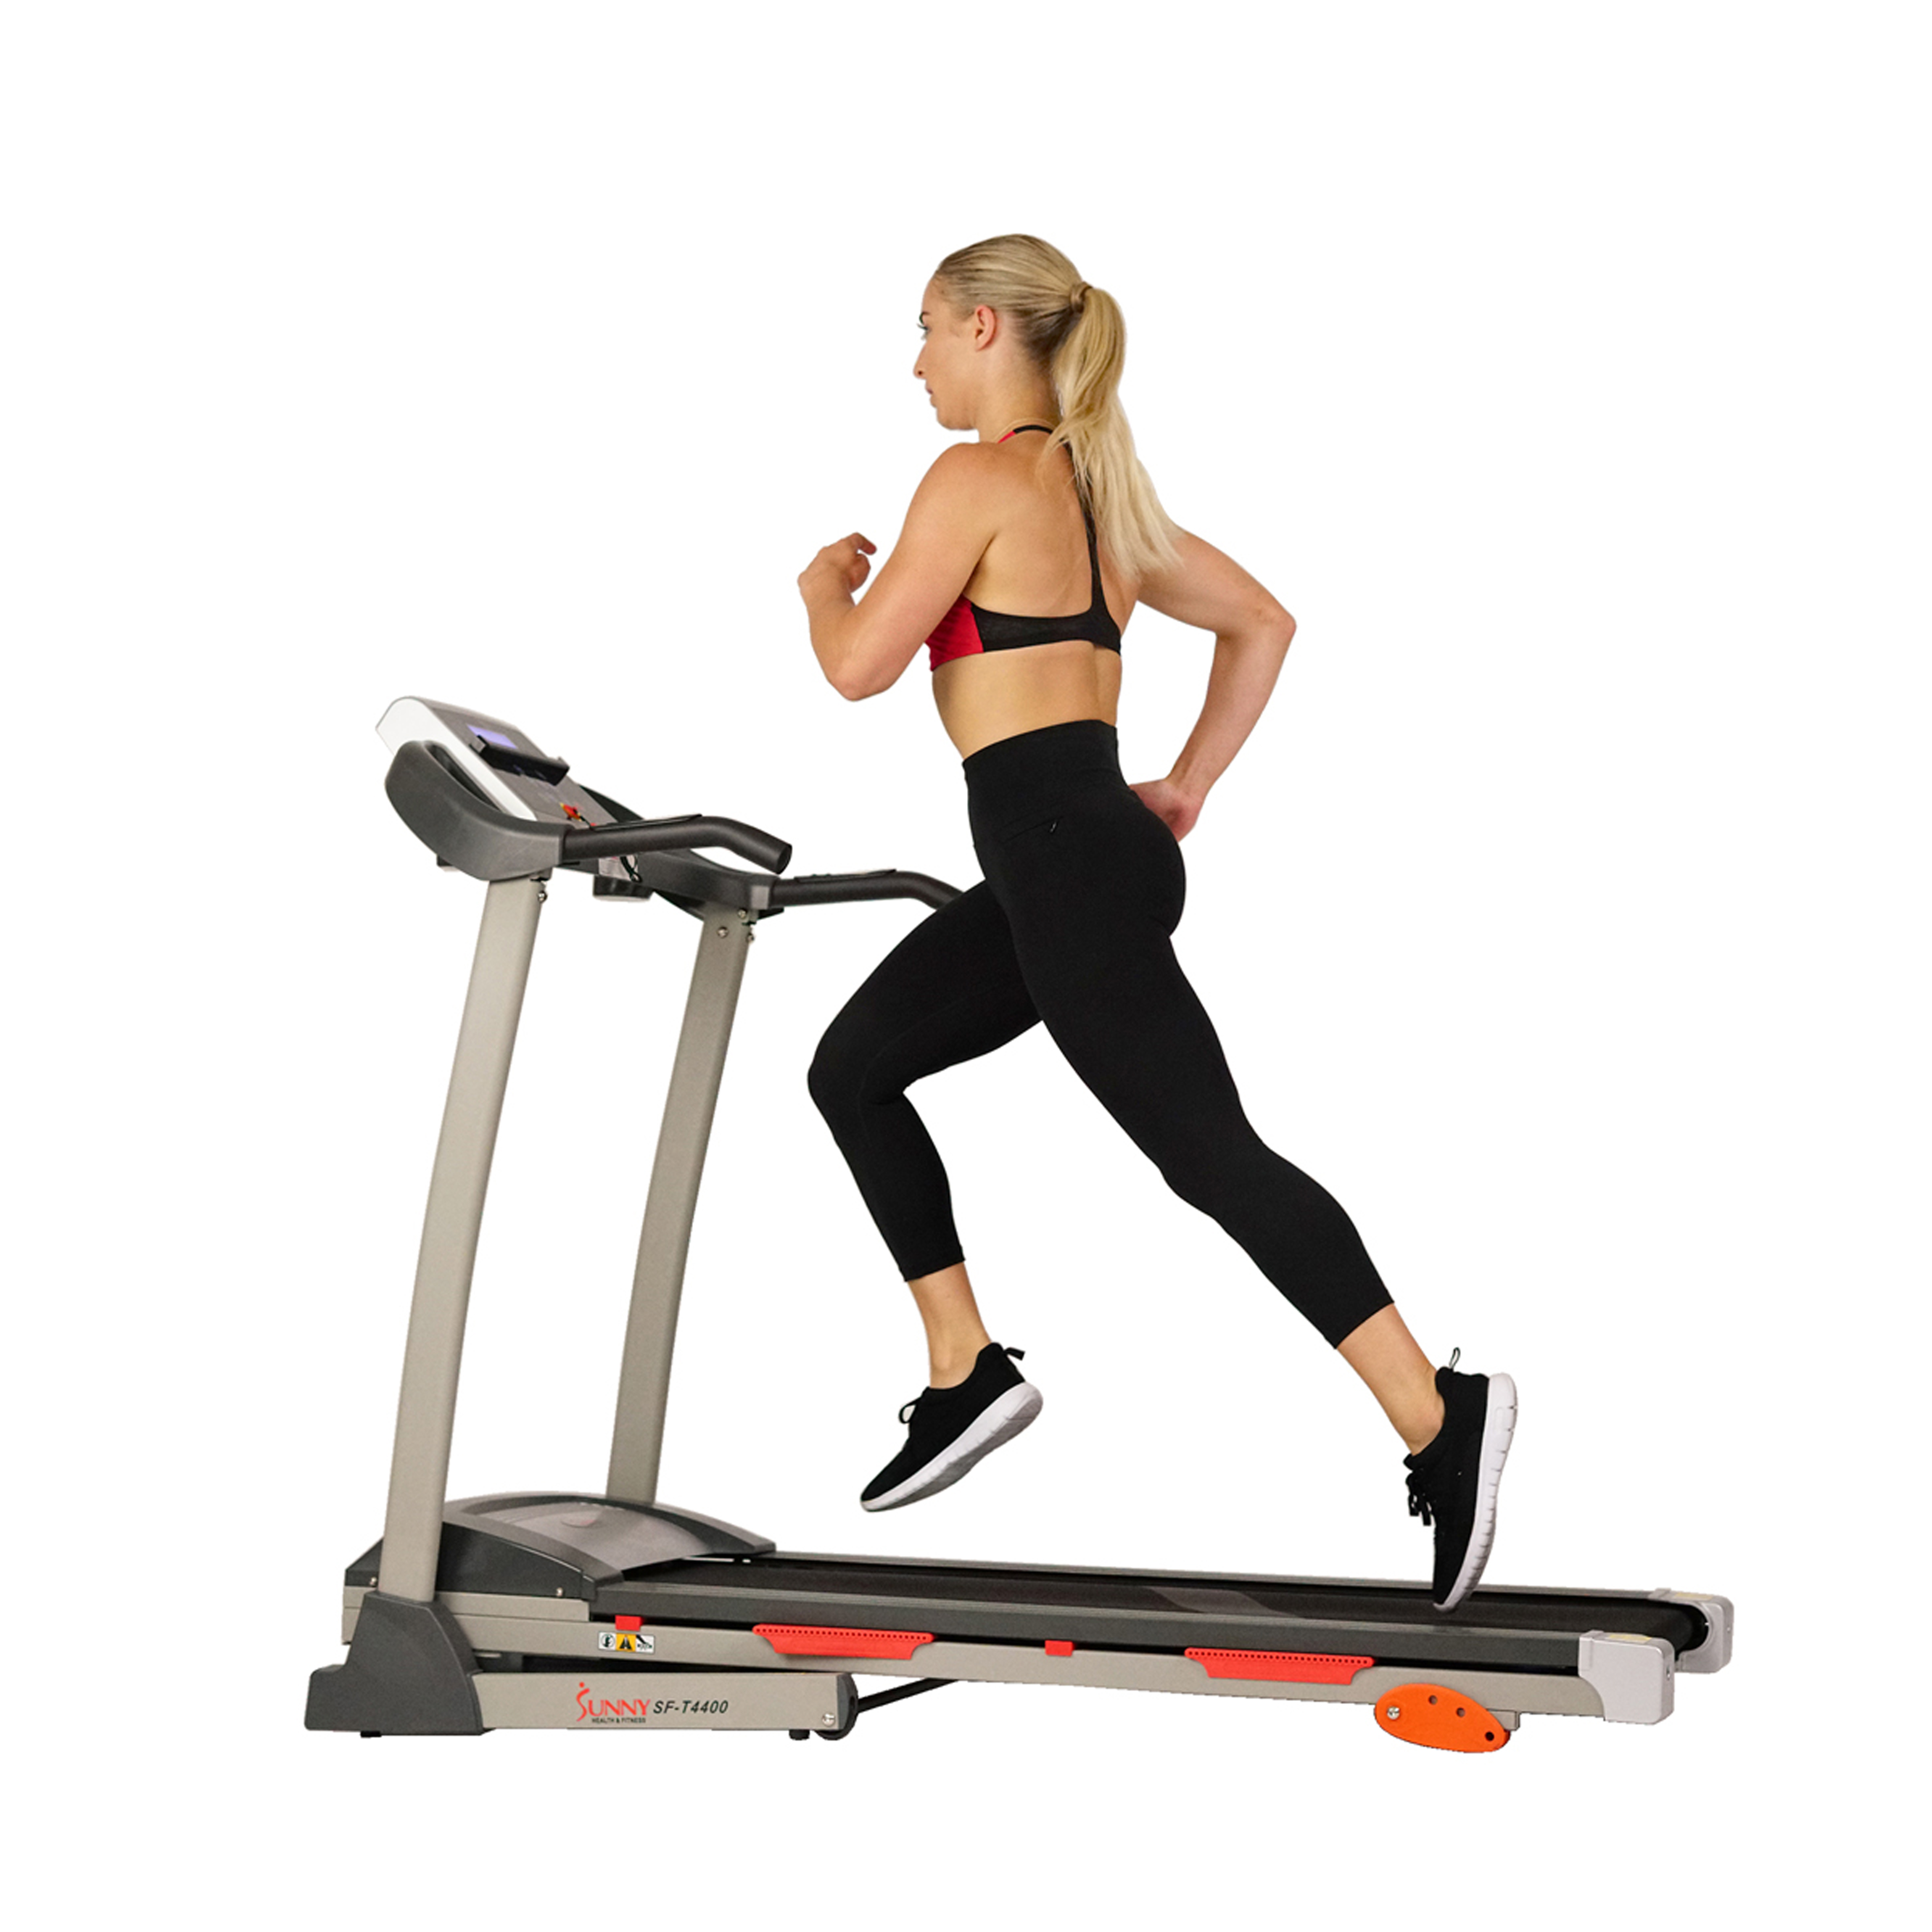 Sunny Health & Fitness Treadmill with Manual Incline, Pulse Sensors, Folding, LCD Monitor for Exercise SF-T4400 - image 1 of 13